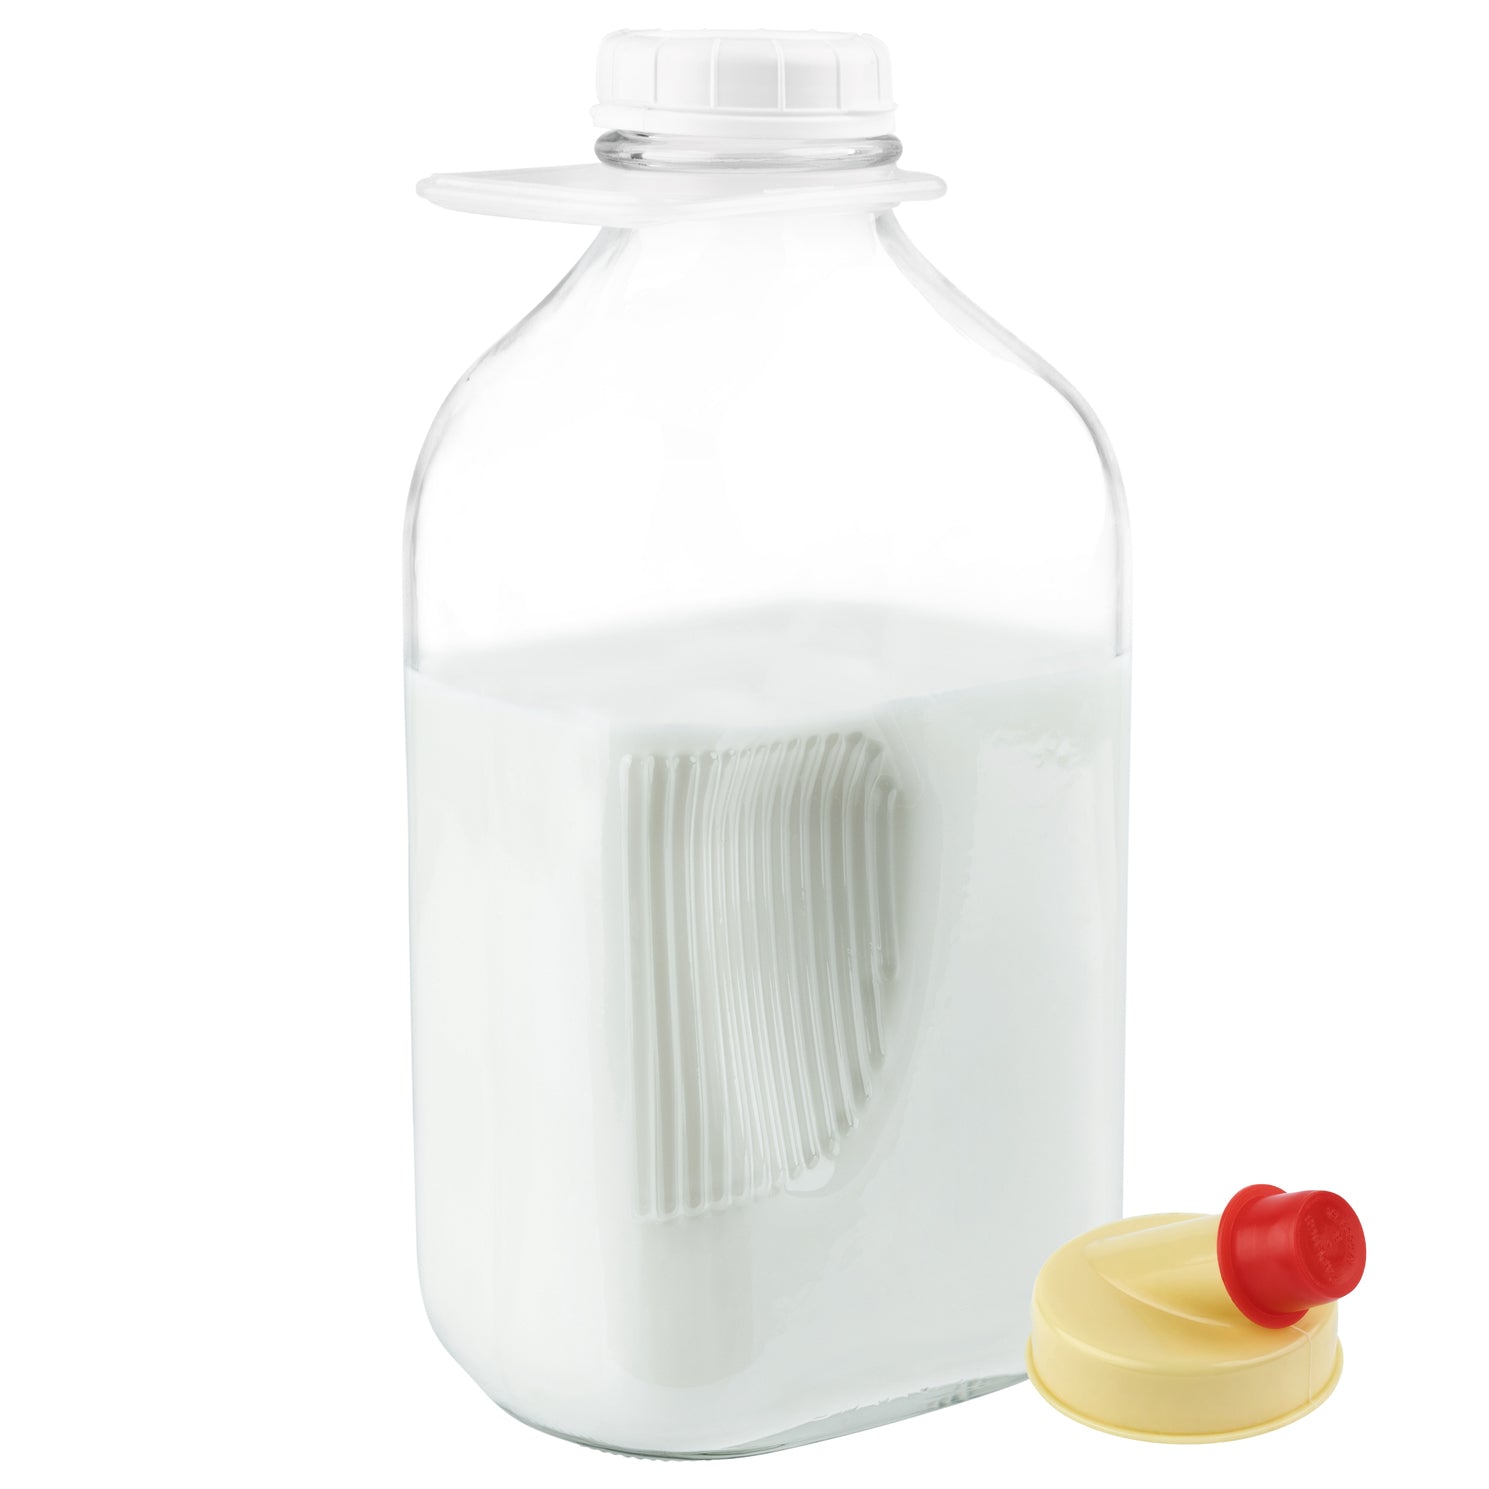 Kitchentoolz 64 Oz Glass Milk Bottle Jugs with Caps, Half Gallon Glass Milk  Container for Refrigerator with Tamper Proof Lids and Pour Spouts- Pack of